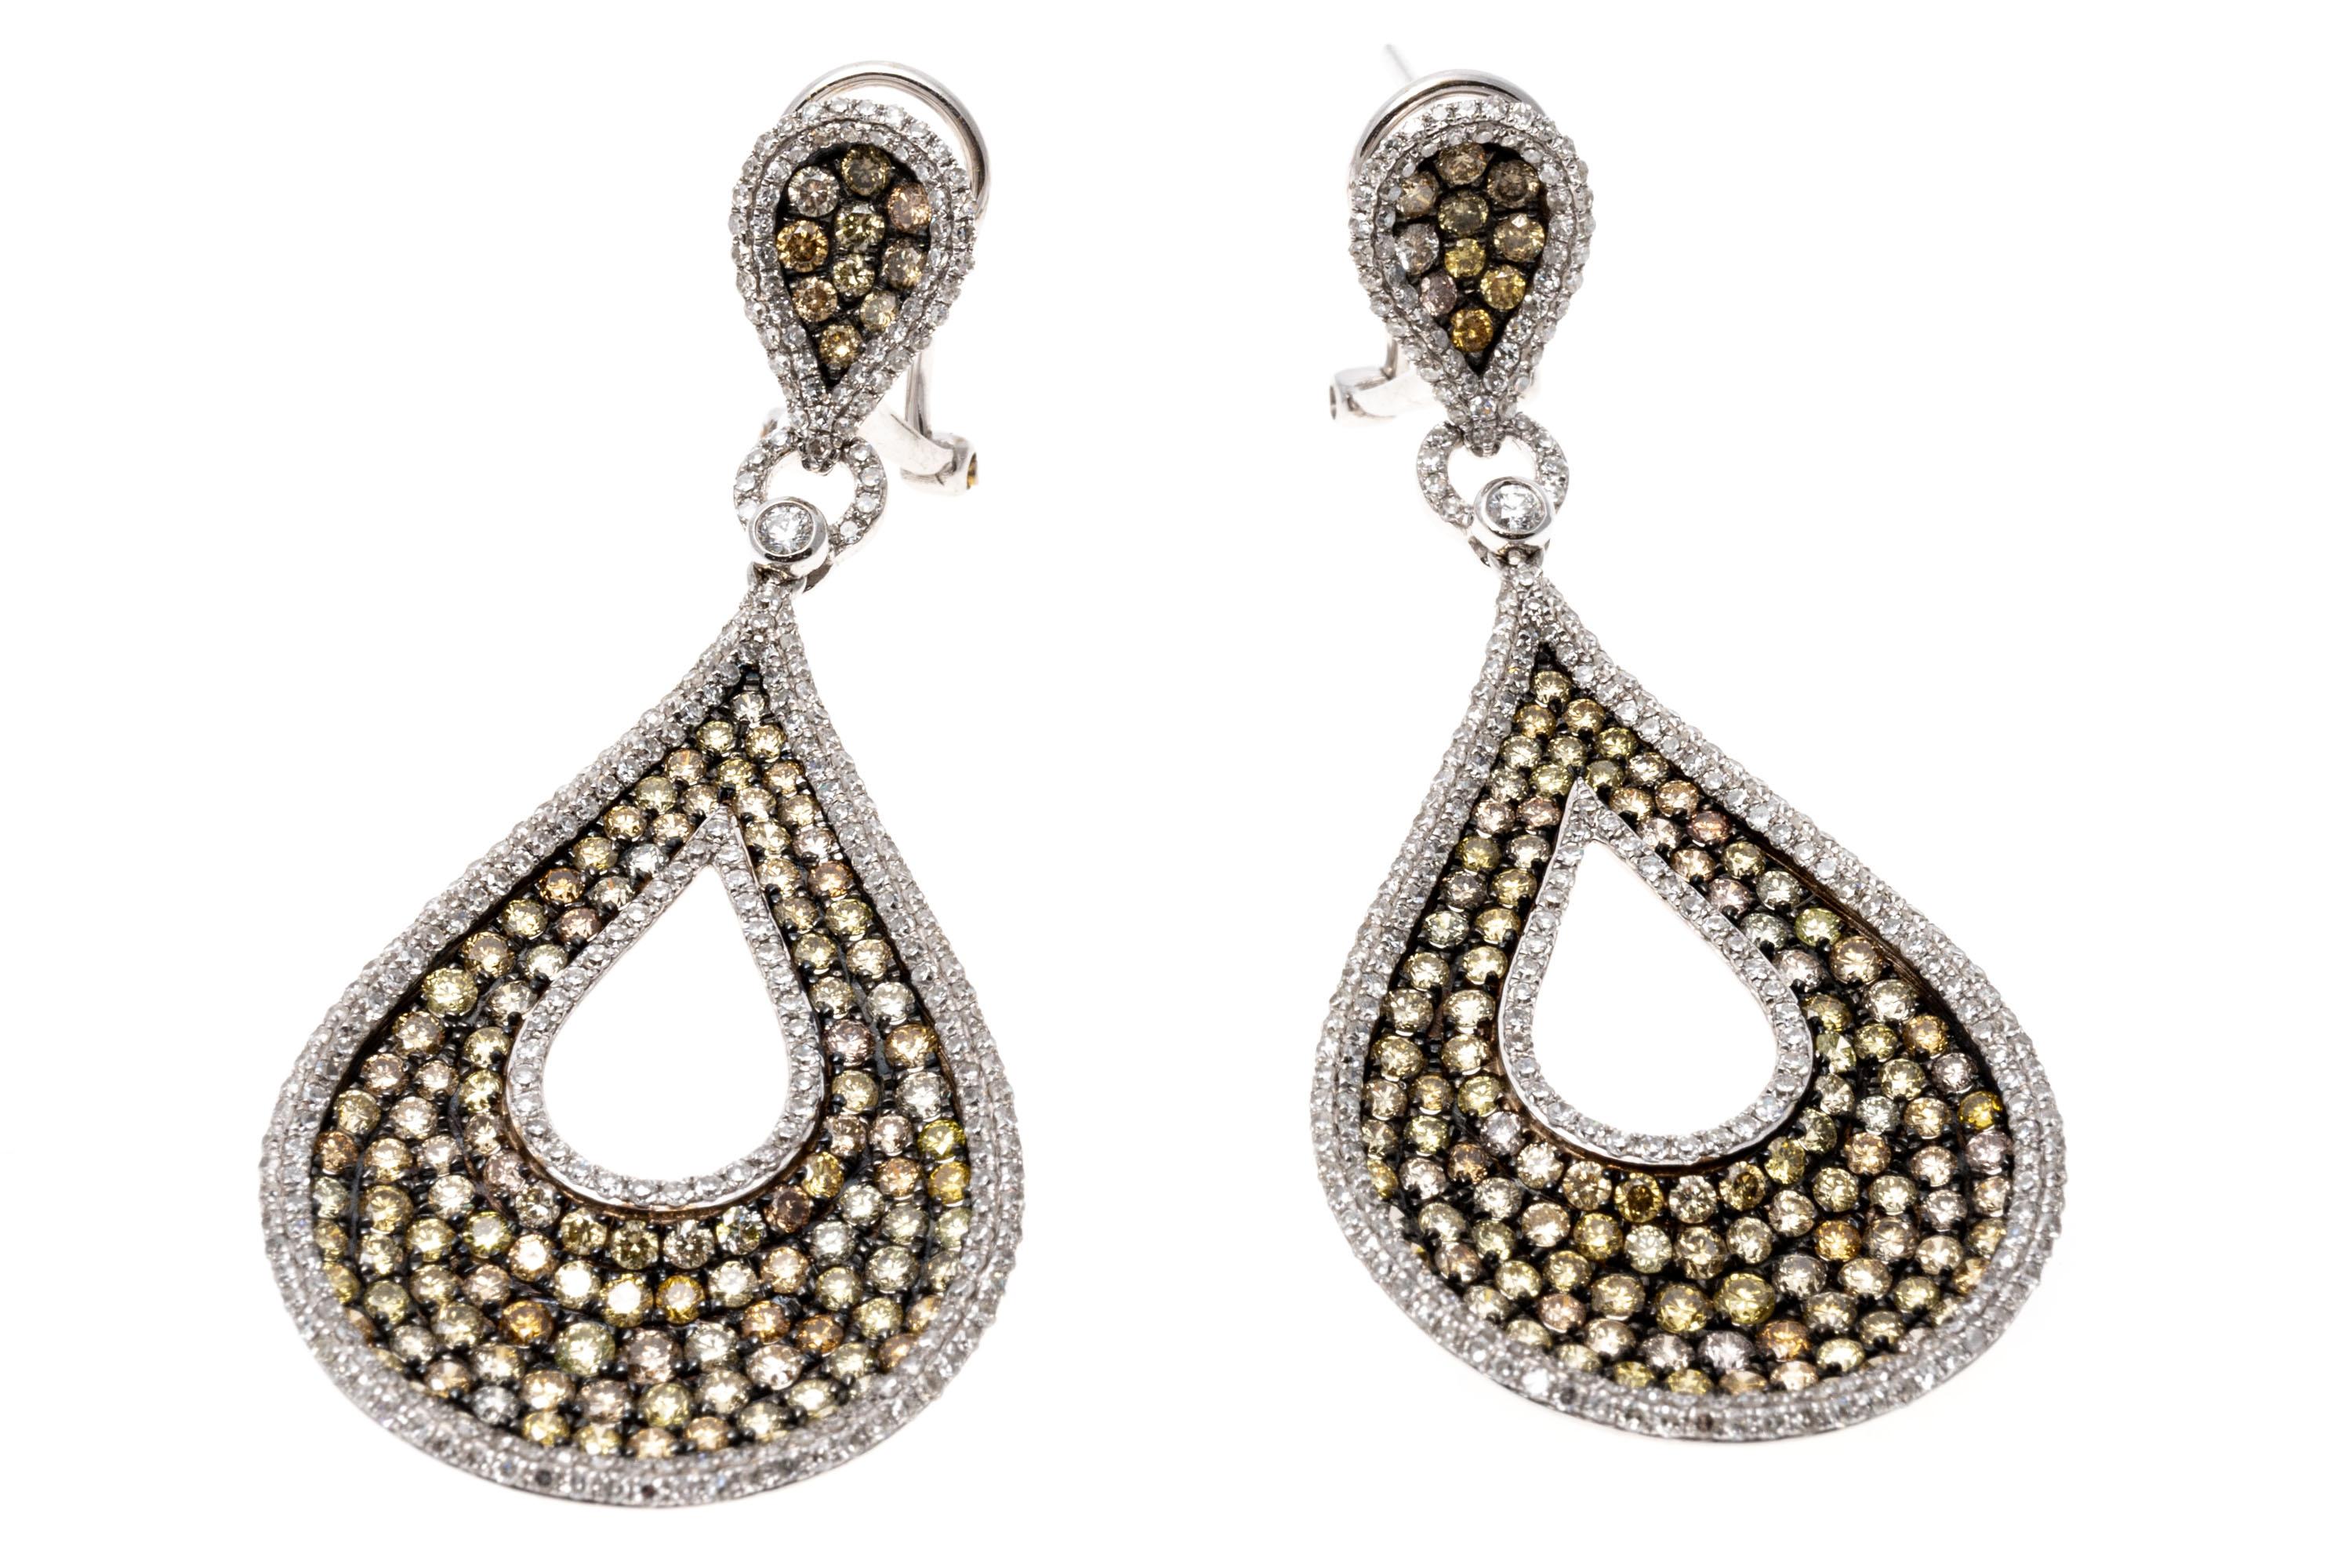 Mark a truly spectacular statement with these pendant earrings. The pendants suspended from these earrings have a teardrop shape with a cutout at the center. Set into the pendant are brilliant cut colored diamonds ranging from a soft yellow to pale